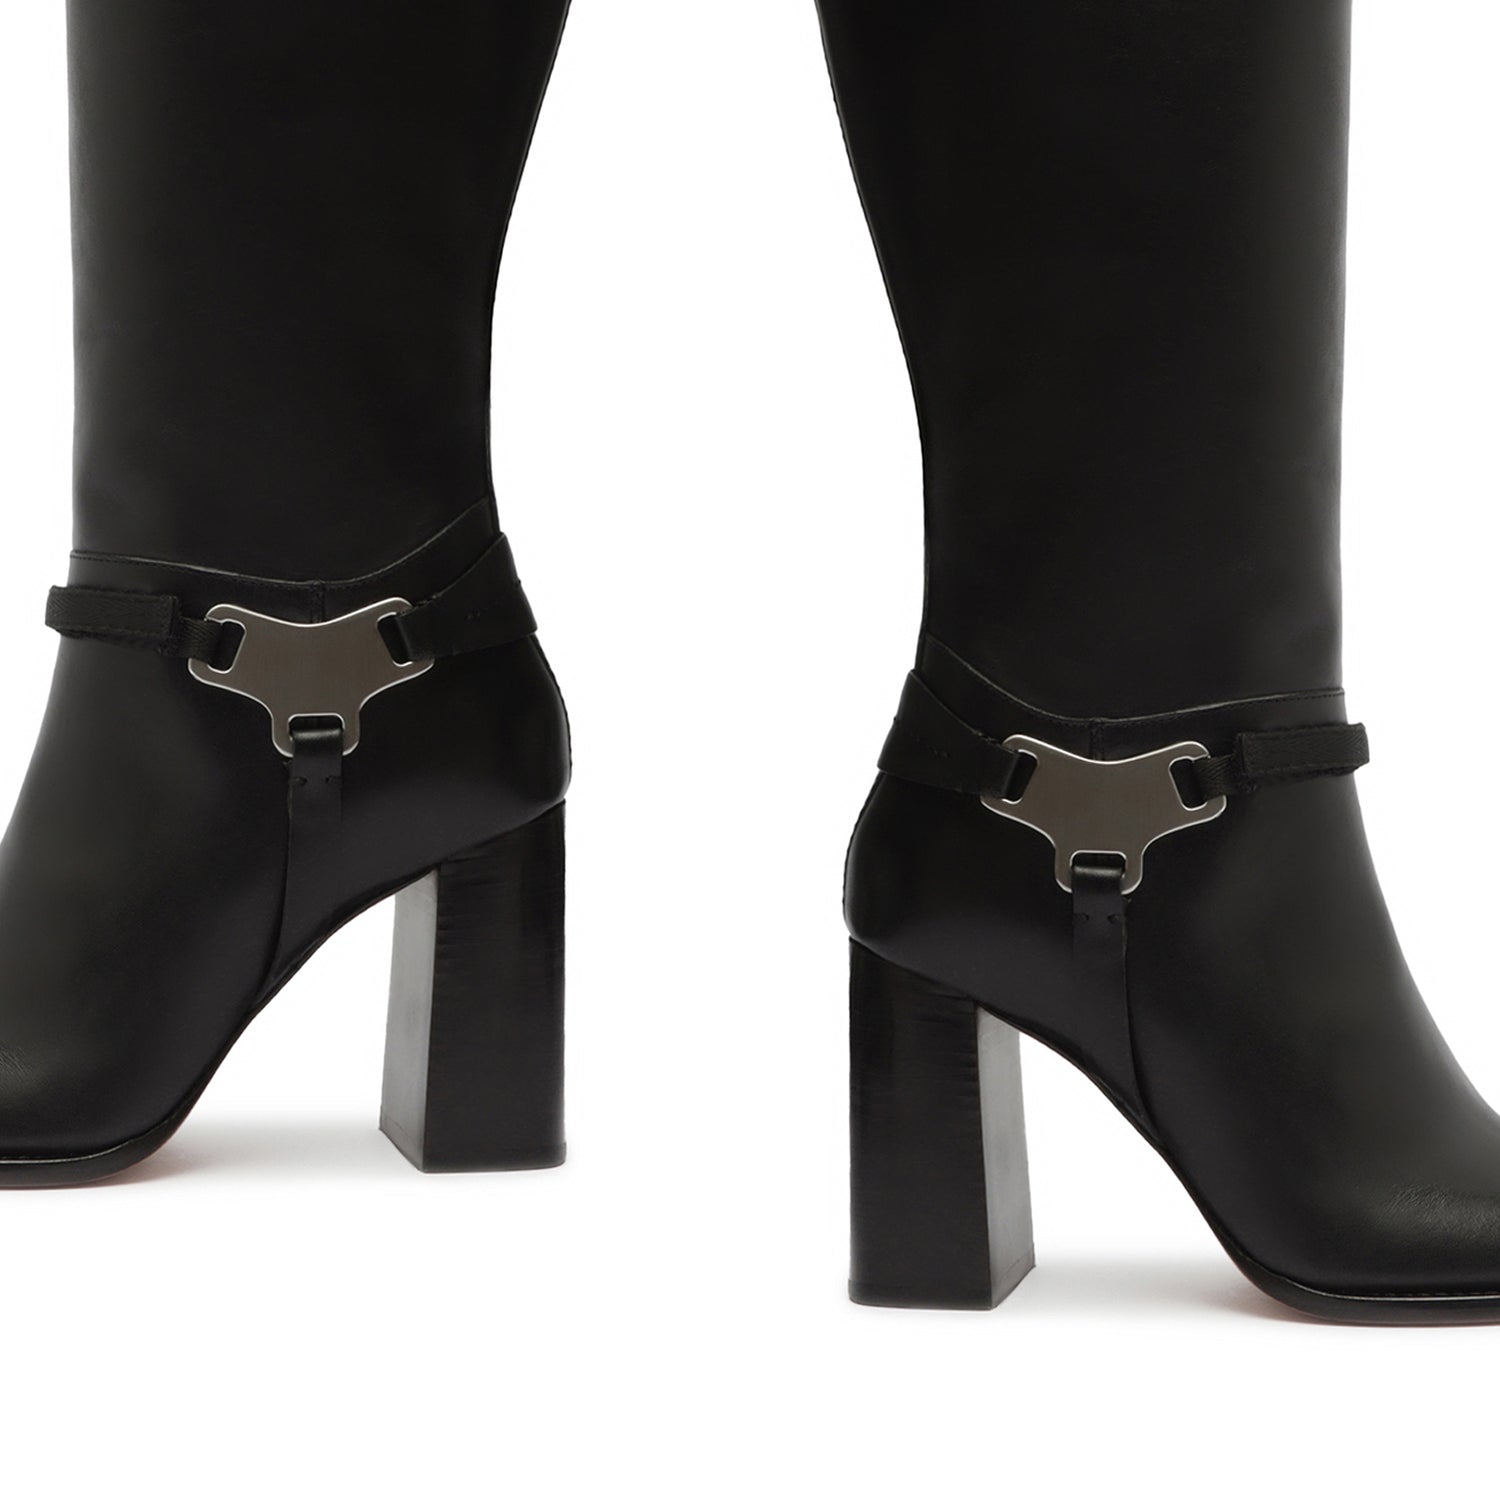 Dallas Leather Boot Boots Fall 23    - Schutz Shoes